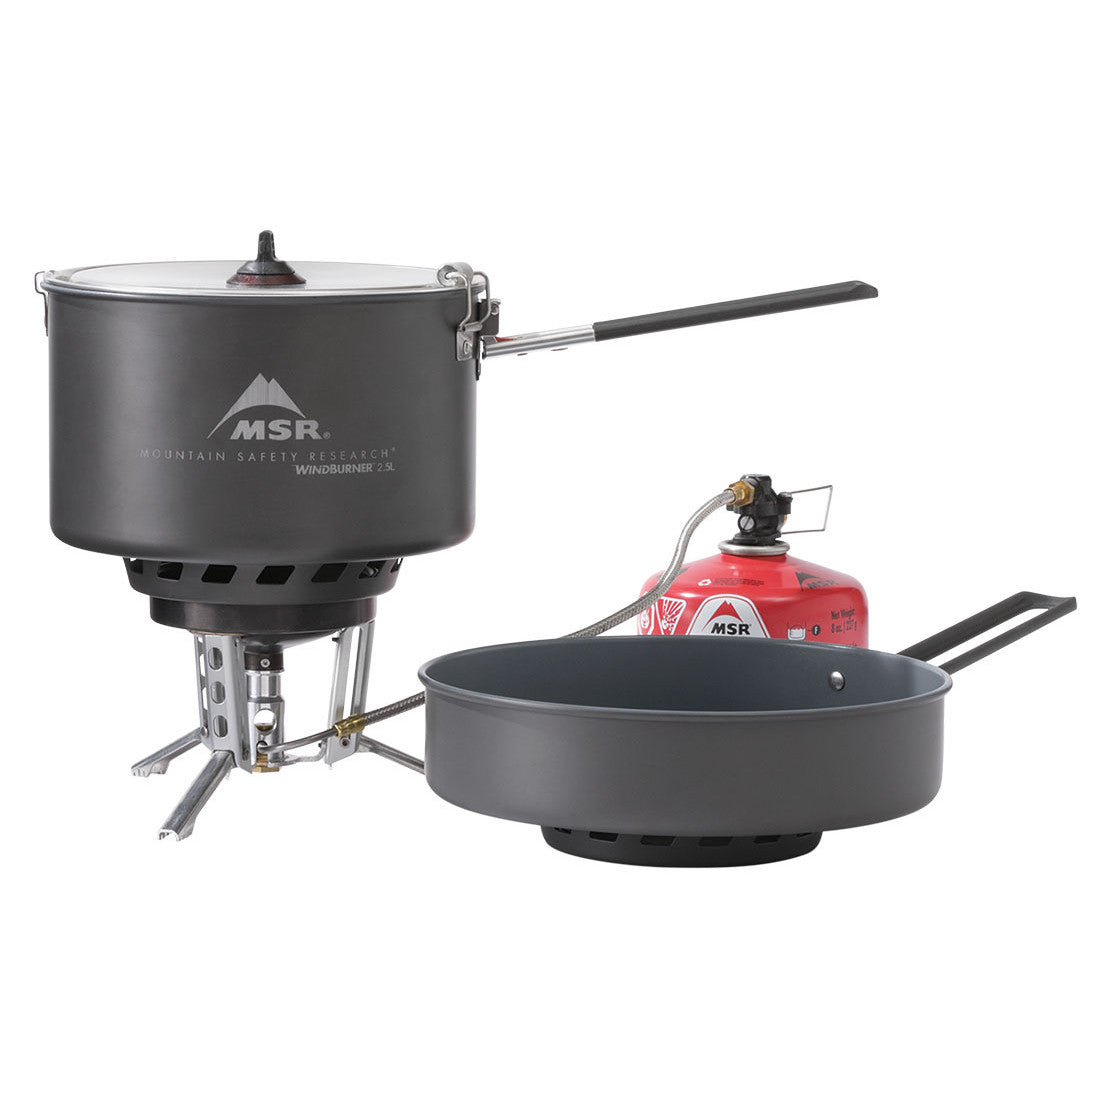 MSR Windburner Combo Camping Stove System, showing all included parts